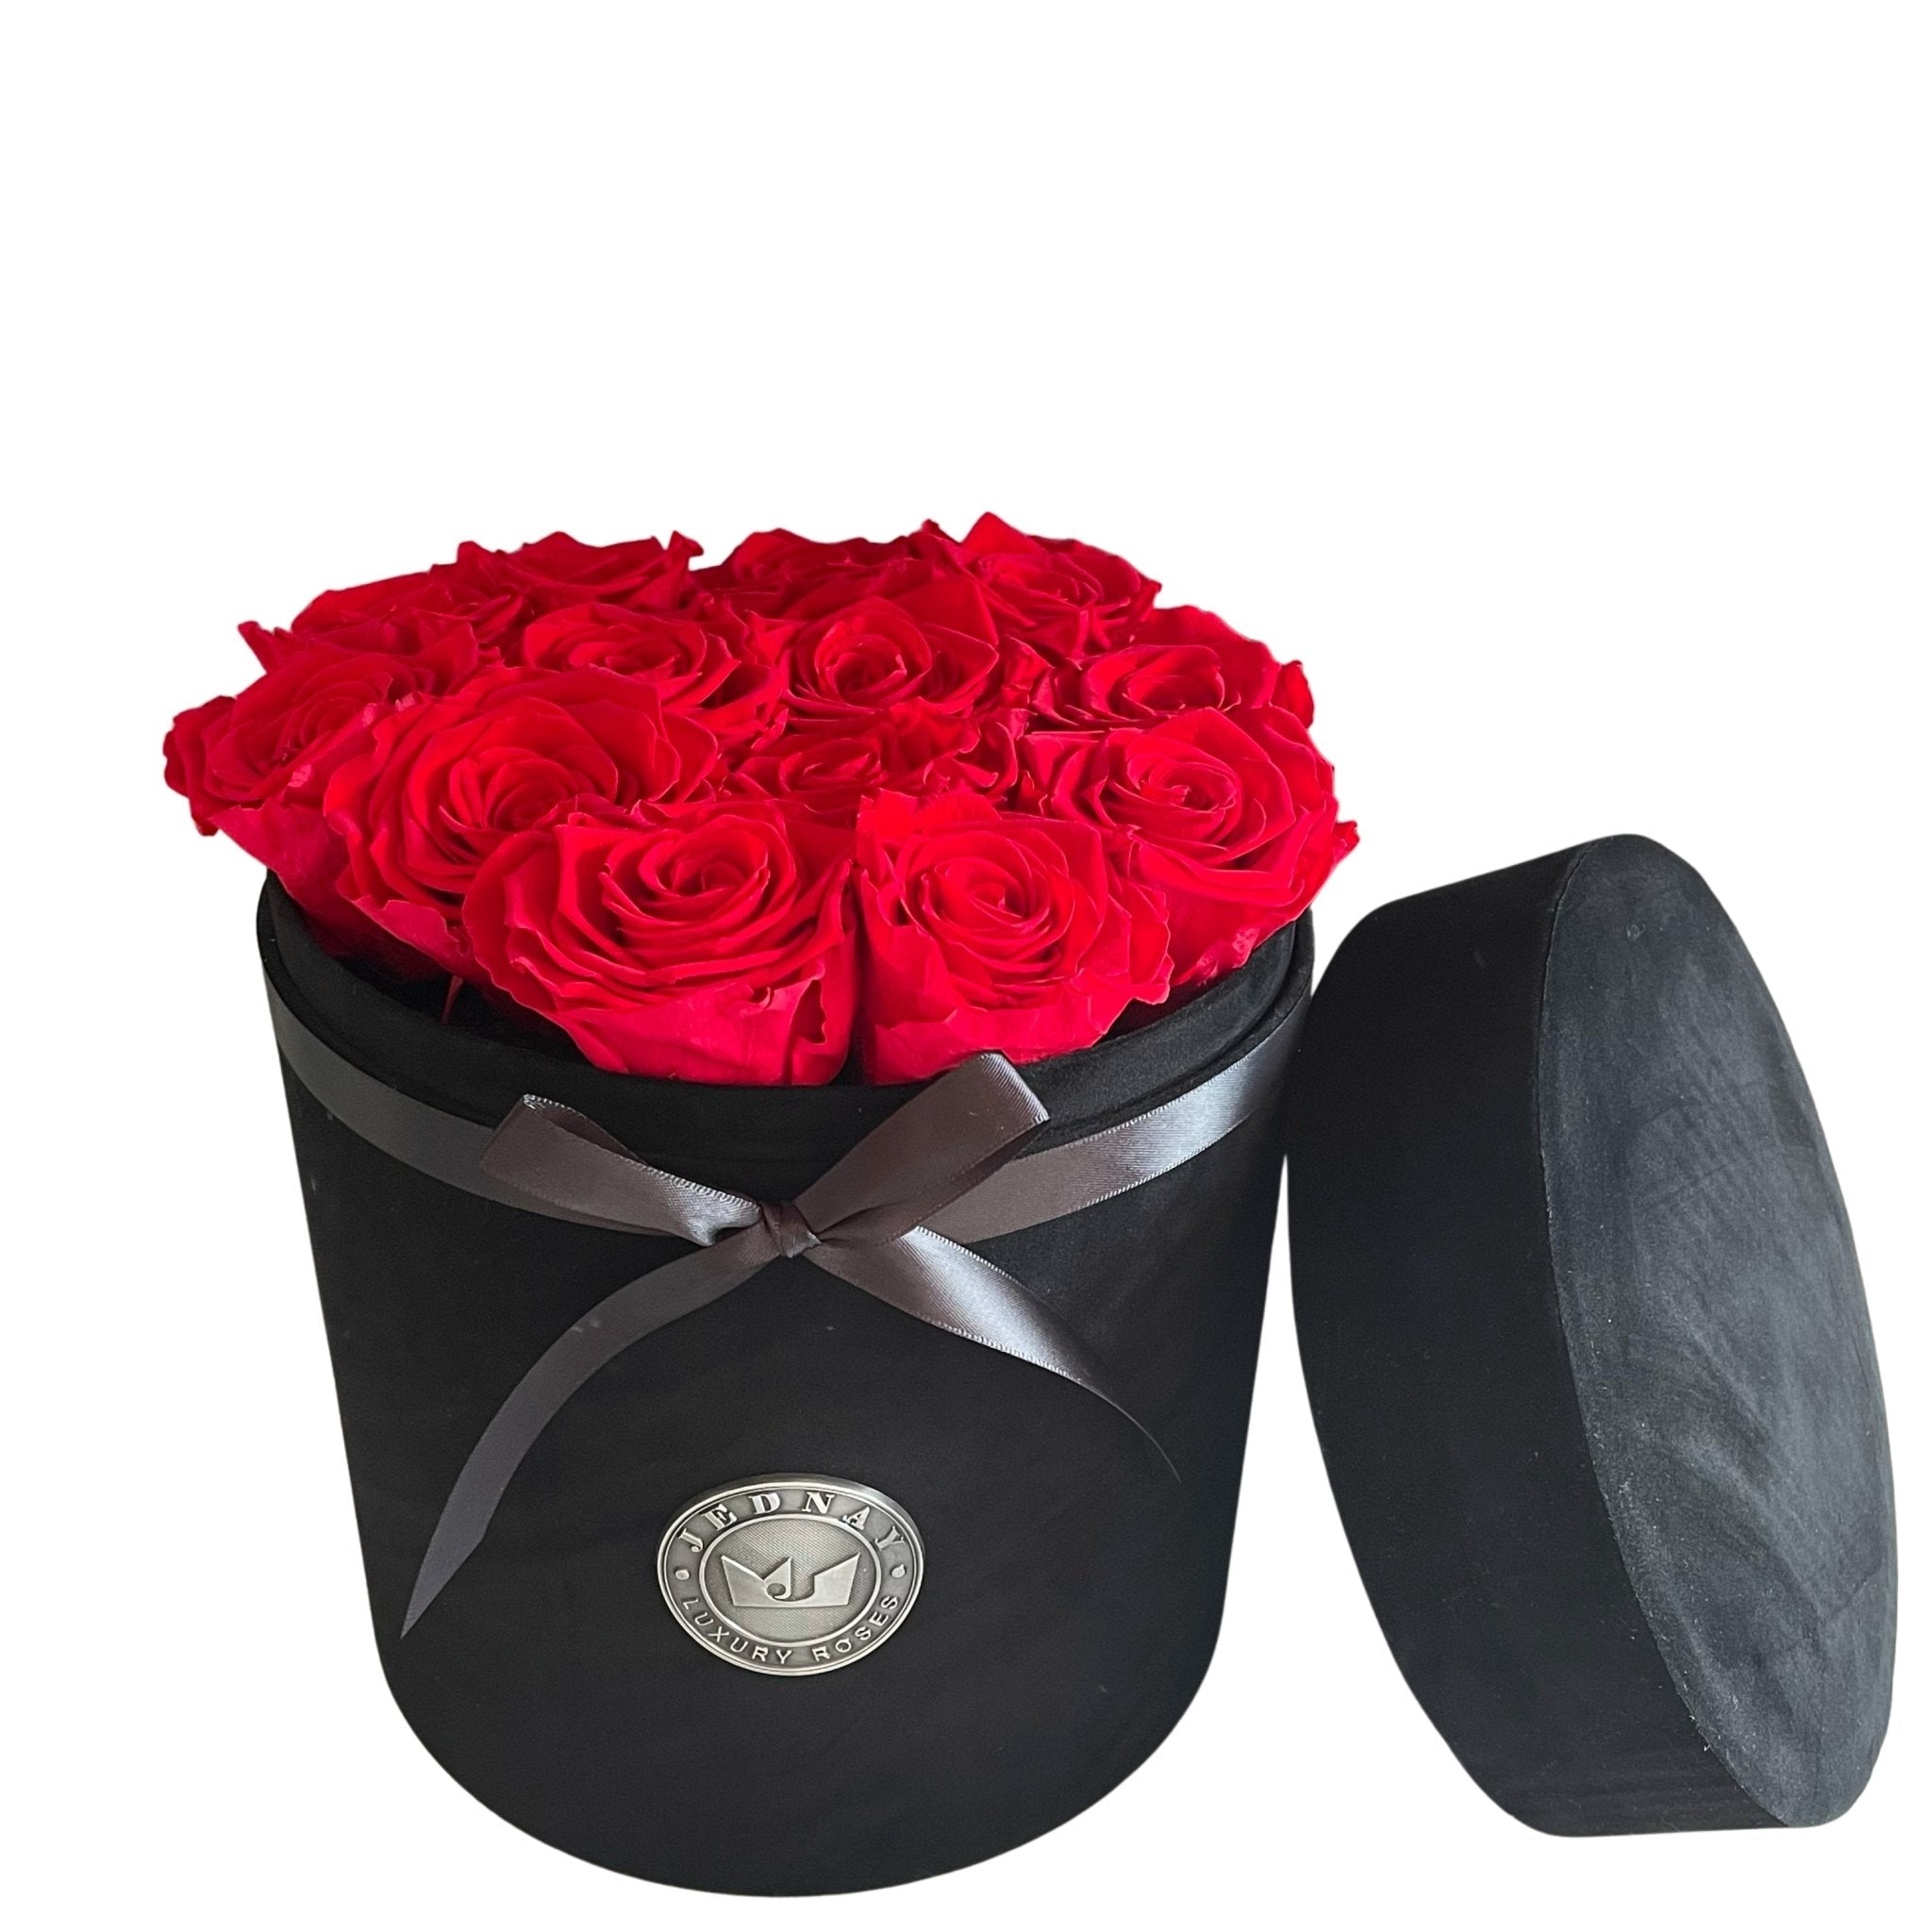 What To Give As A 50th Wedding Anniversary Gift? - Jednay Roses